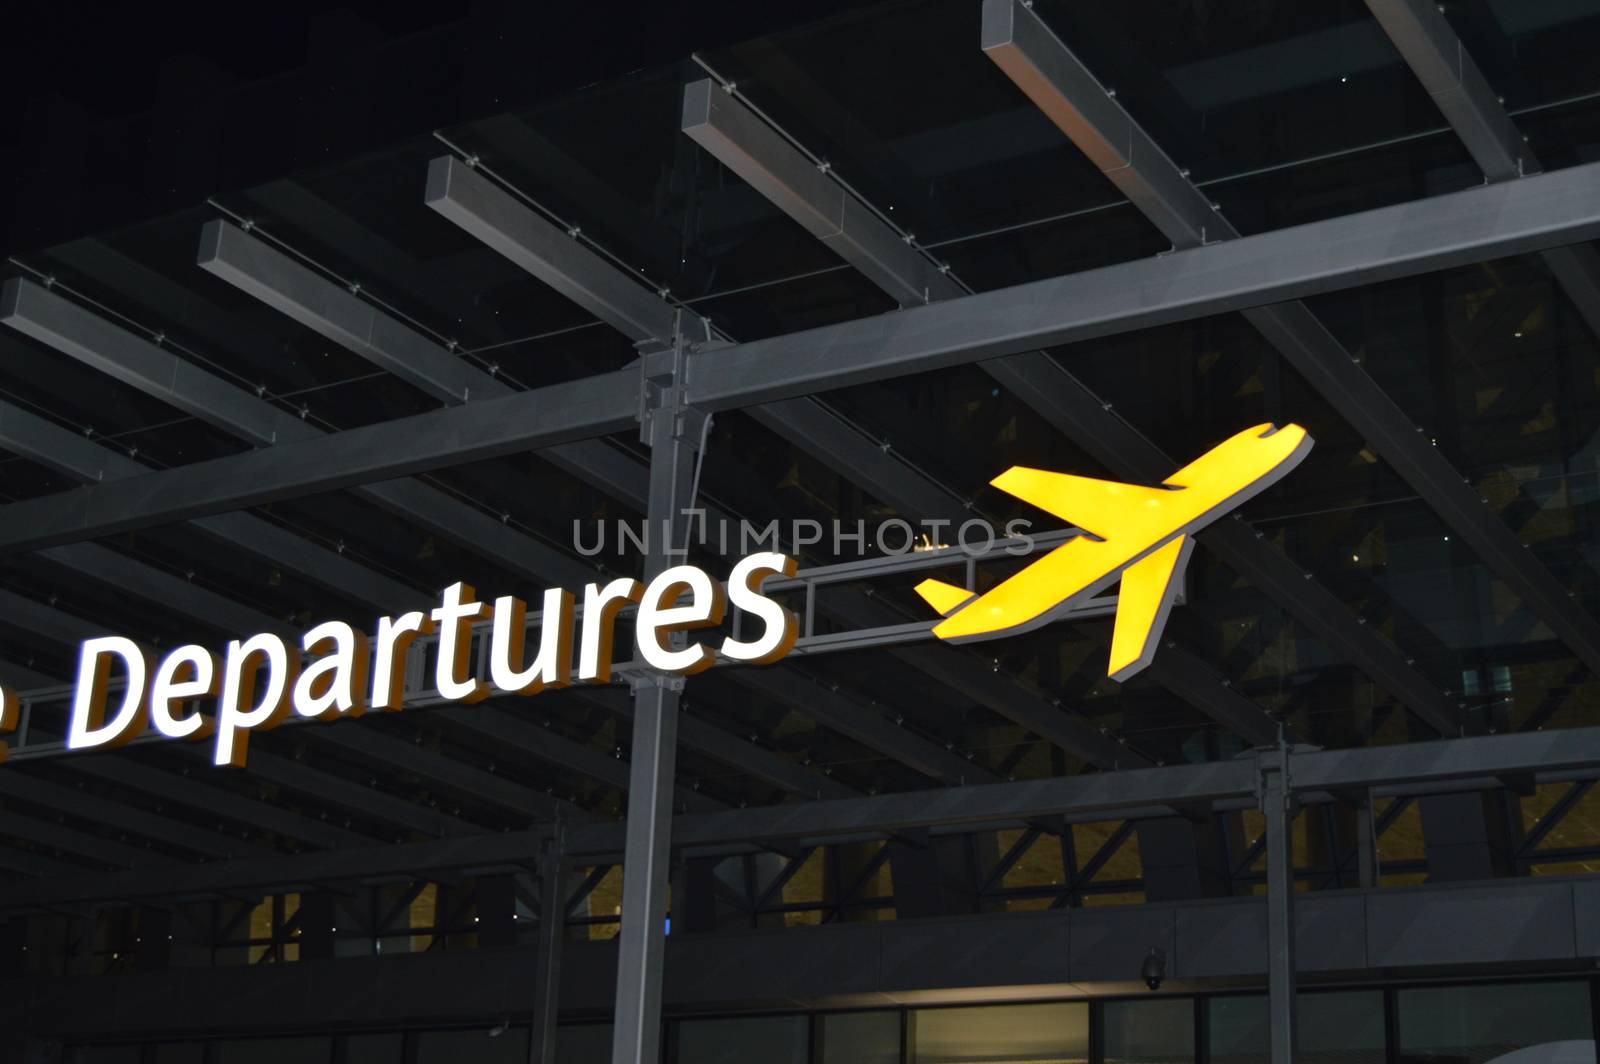 Information about the departure zone, signpost of the aircraft at the airport at night, the concept of travel.